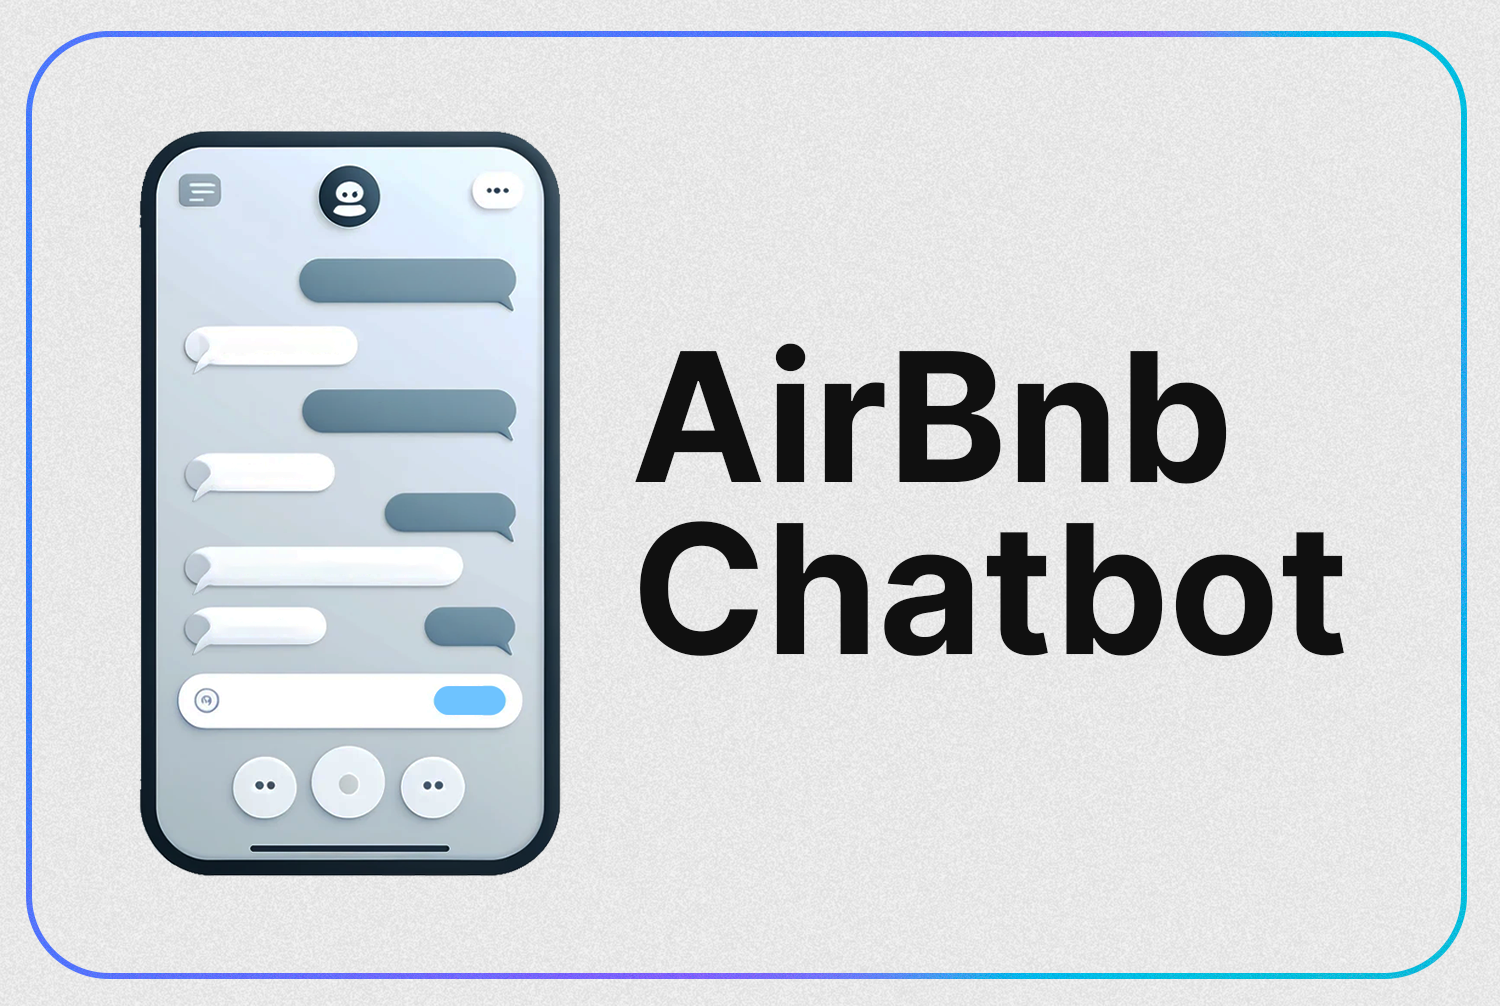 AirBnb Chatbot